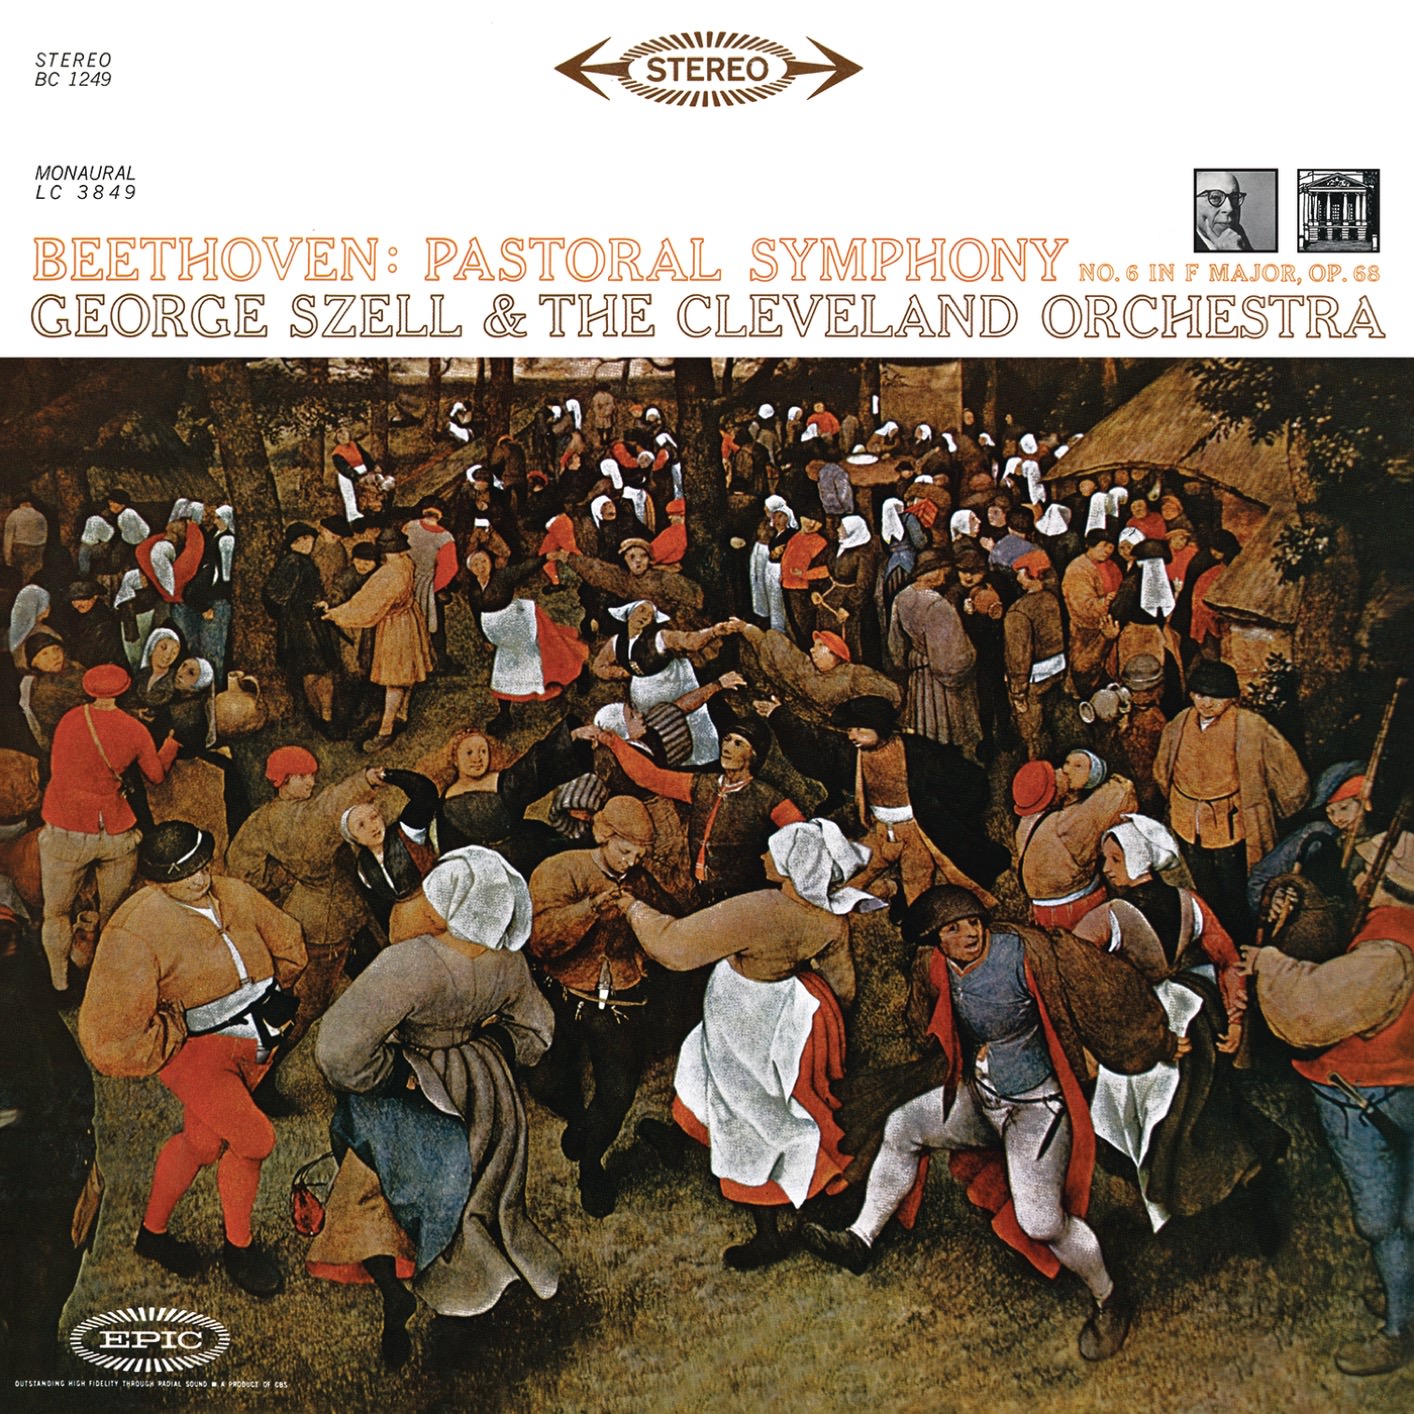 George Szell – Beethoven: Symphony No. 6 in F Major, Op. 68 “Pastoral” (1962/2018) [FLAC 24bit/192kHz]